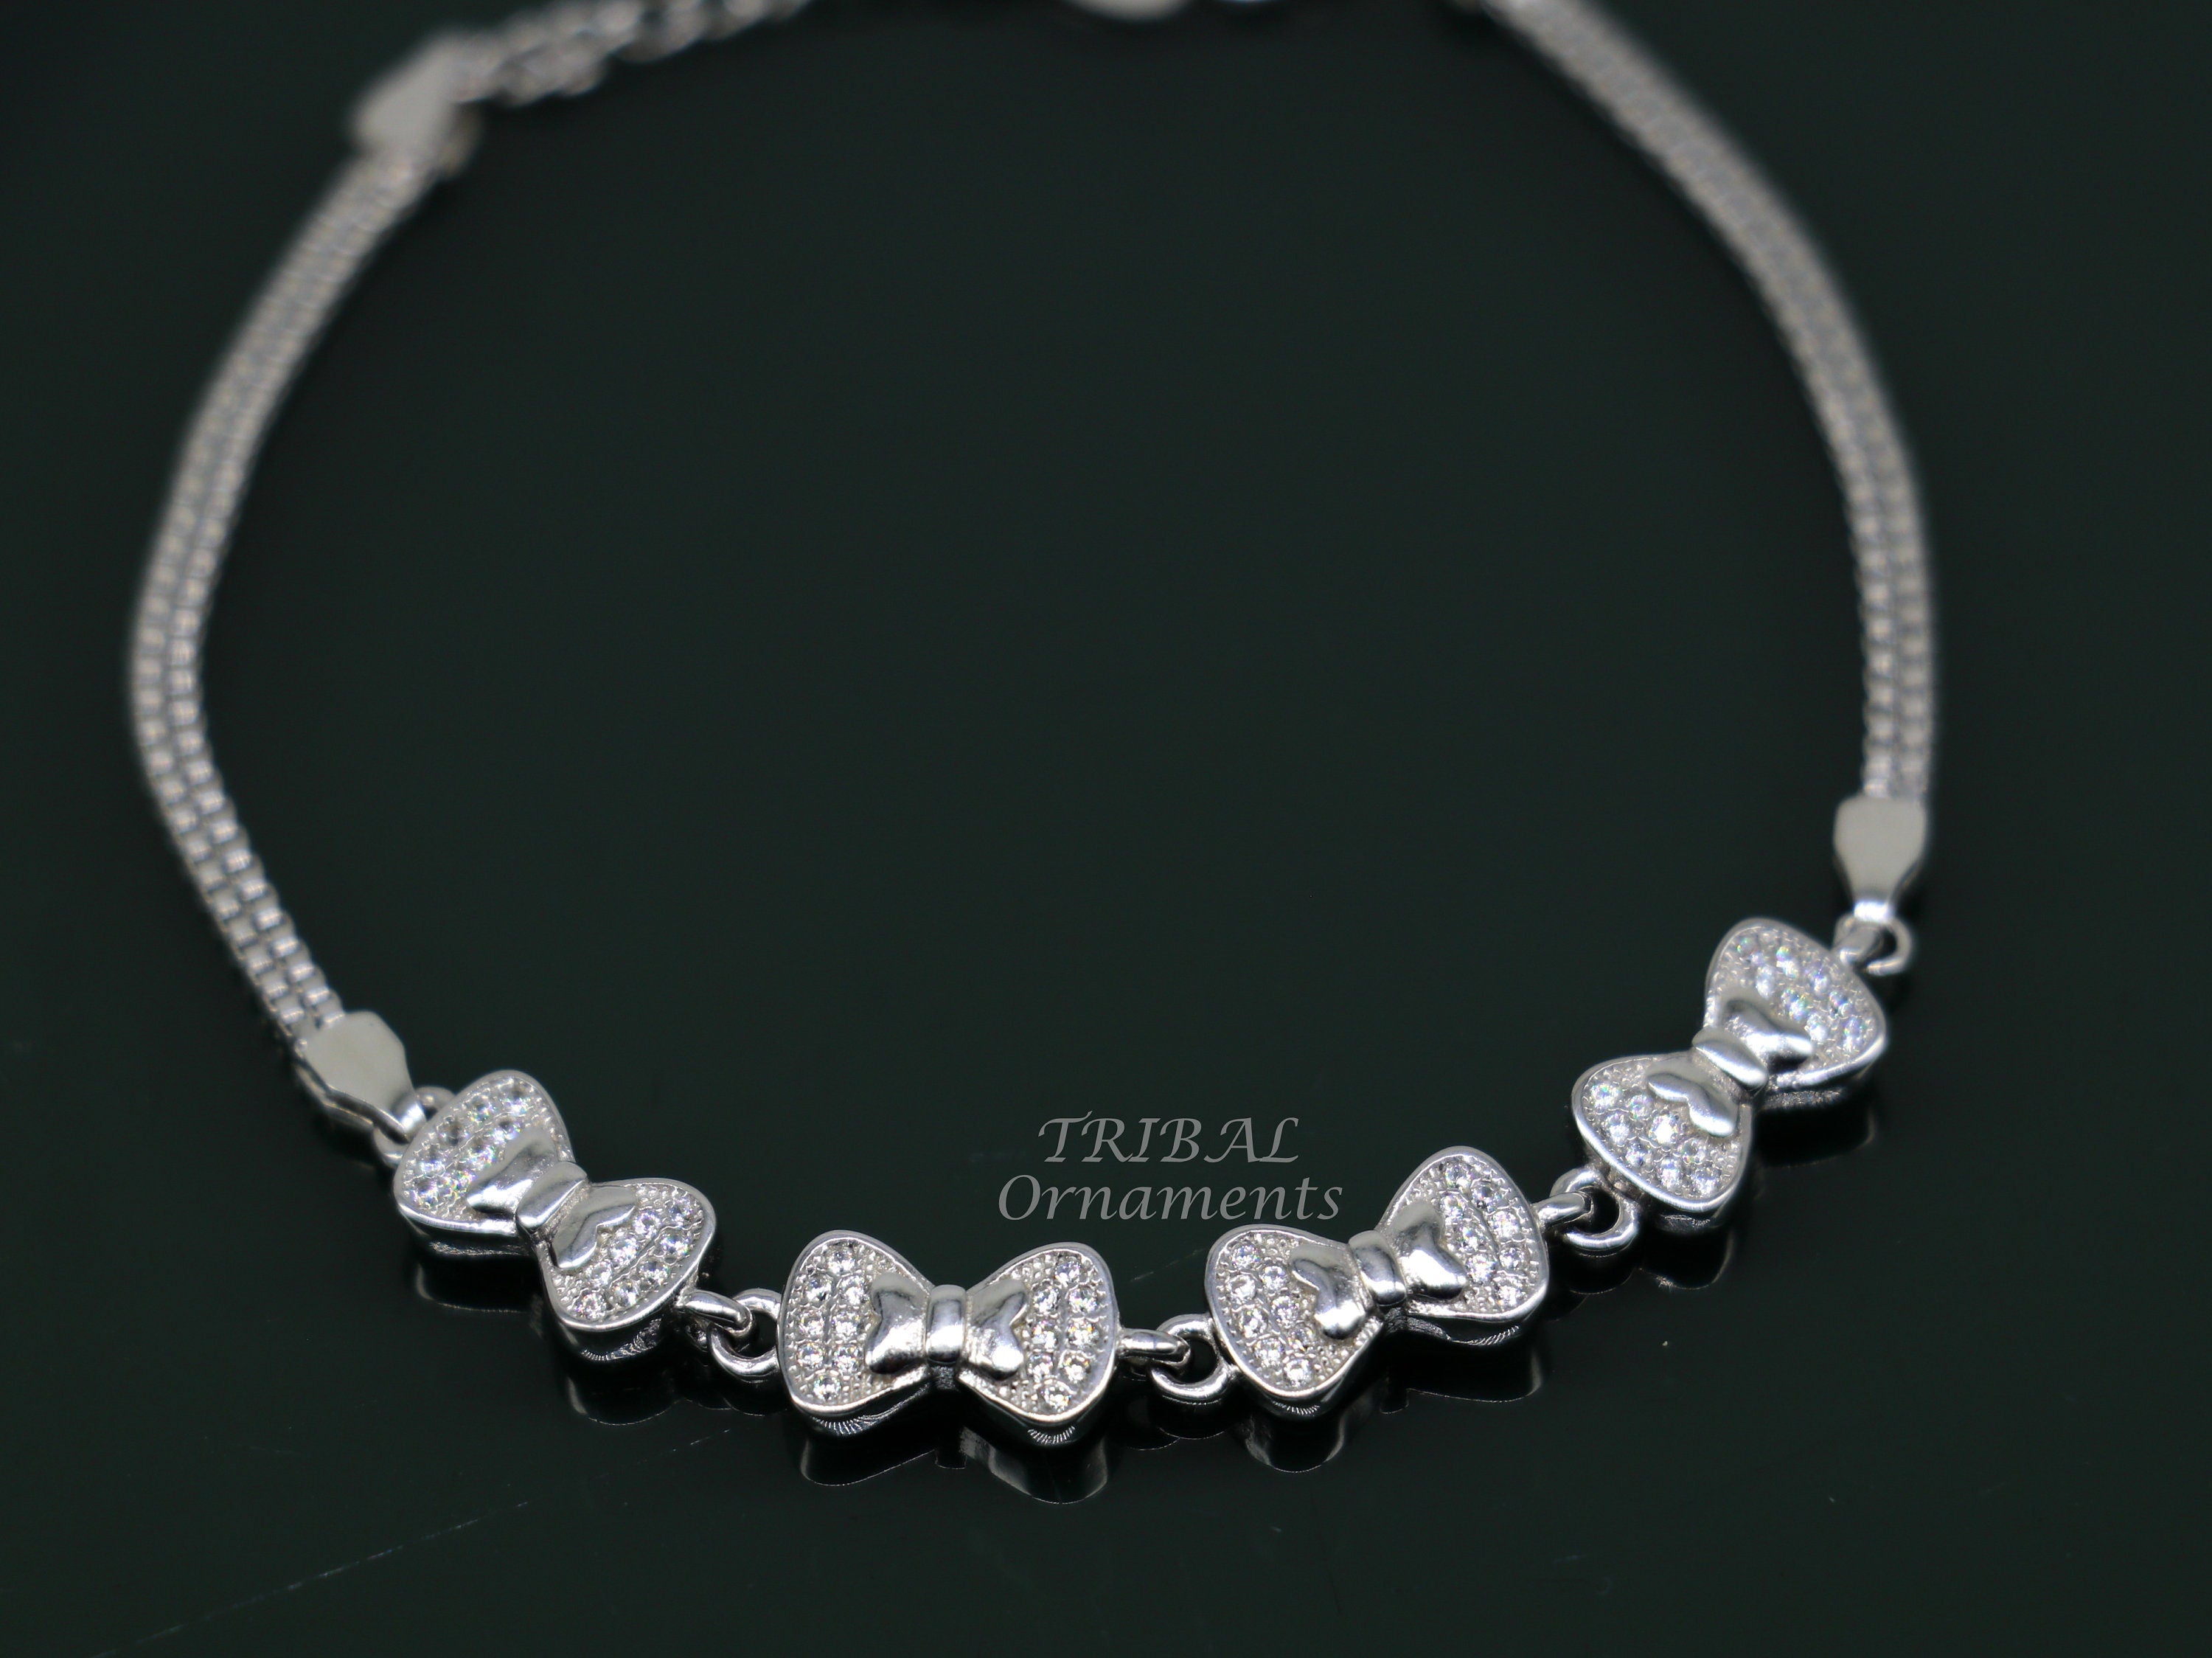 Tennis Bracelet Size Guide: How To Pick The Right Carats? - NETCARAT